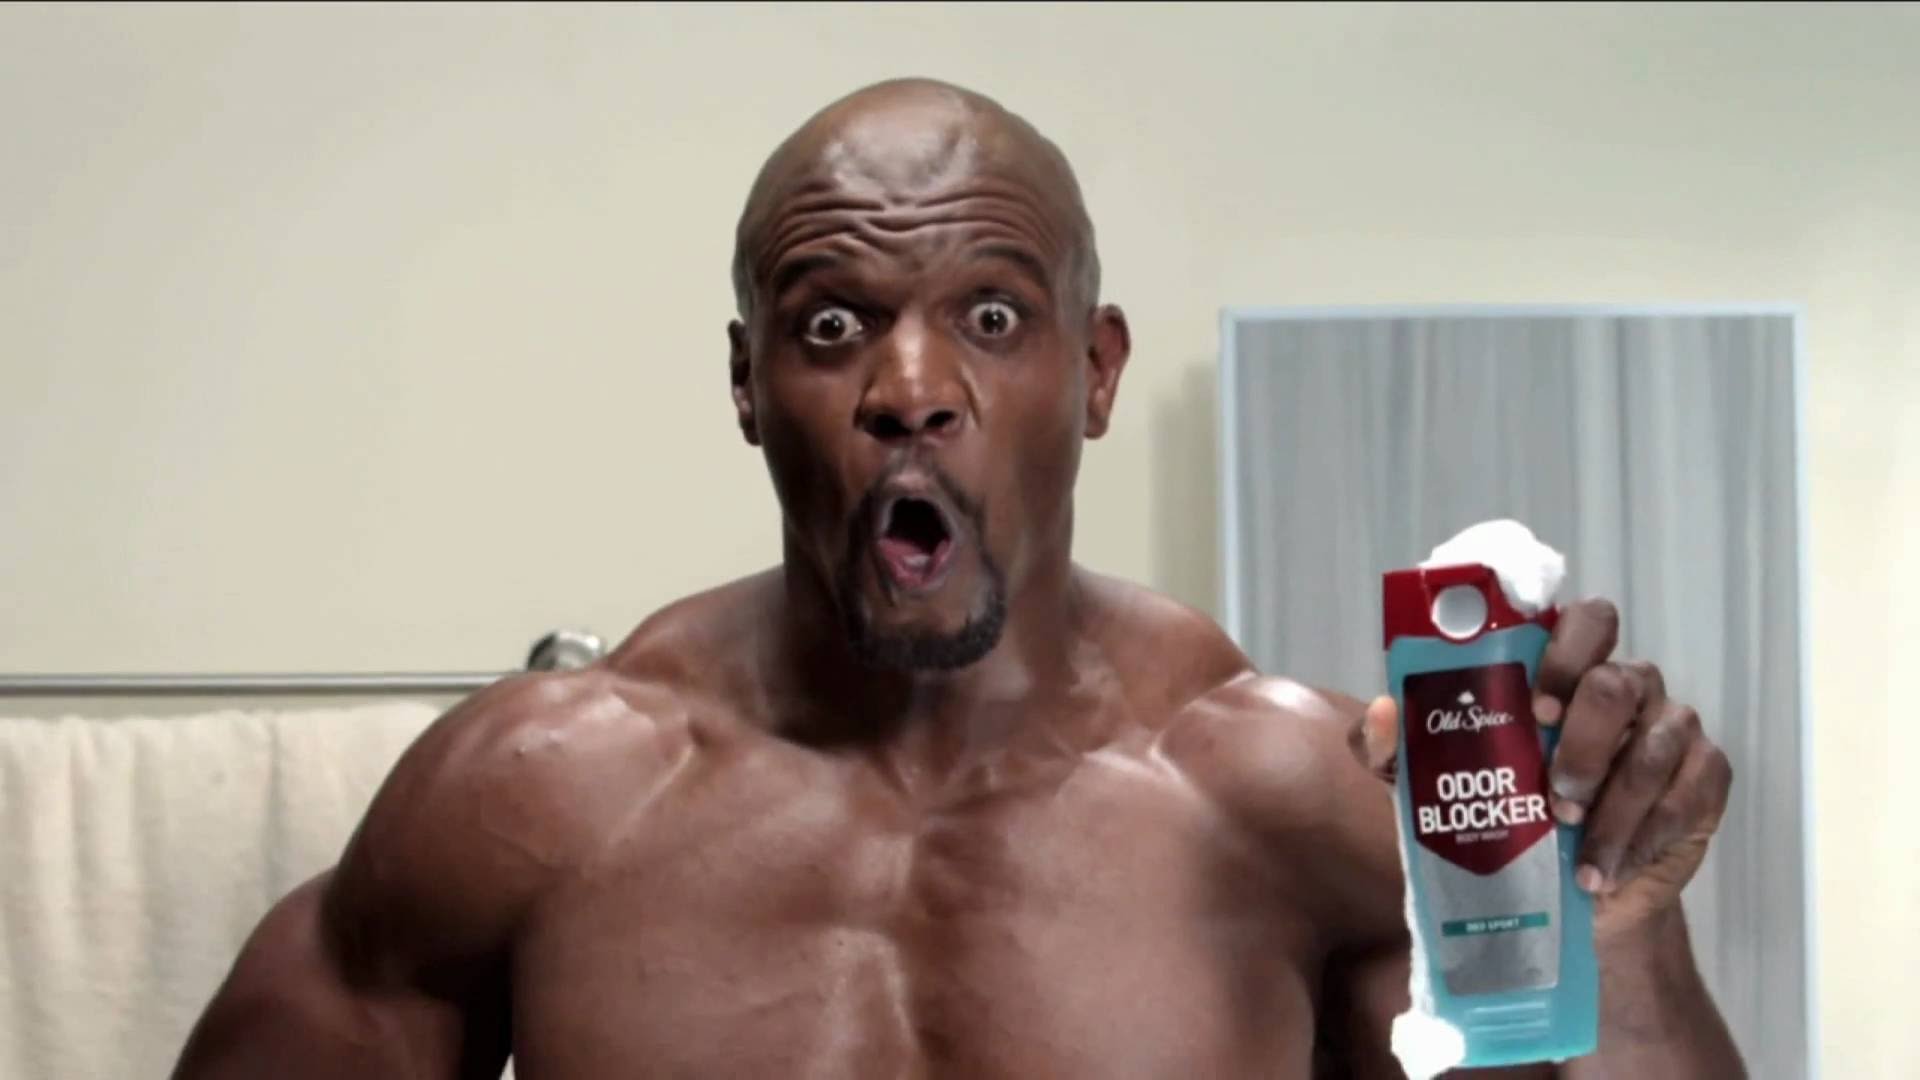 Terry Crews Old Spice Commercials Full Collection - YouTube